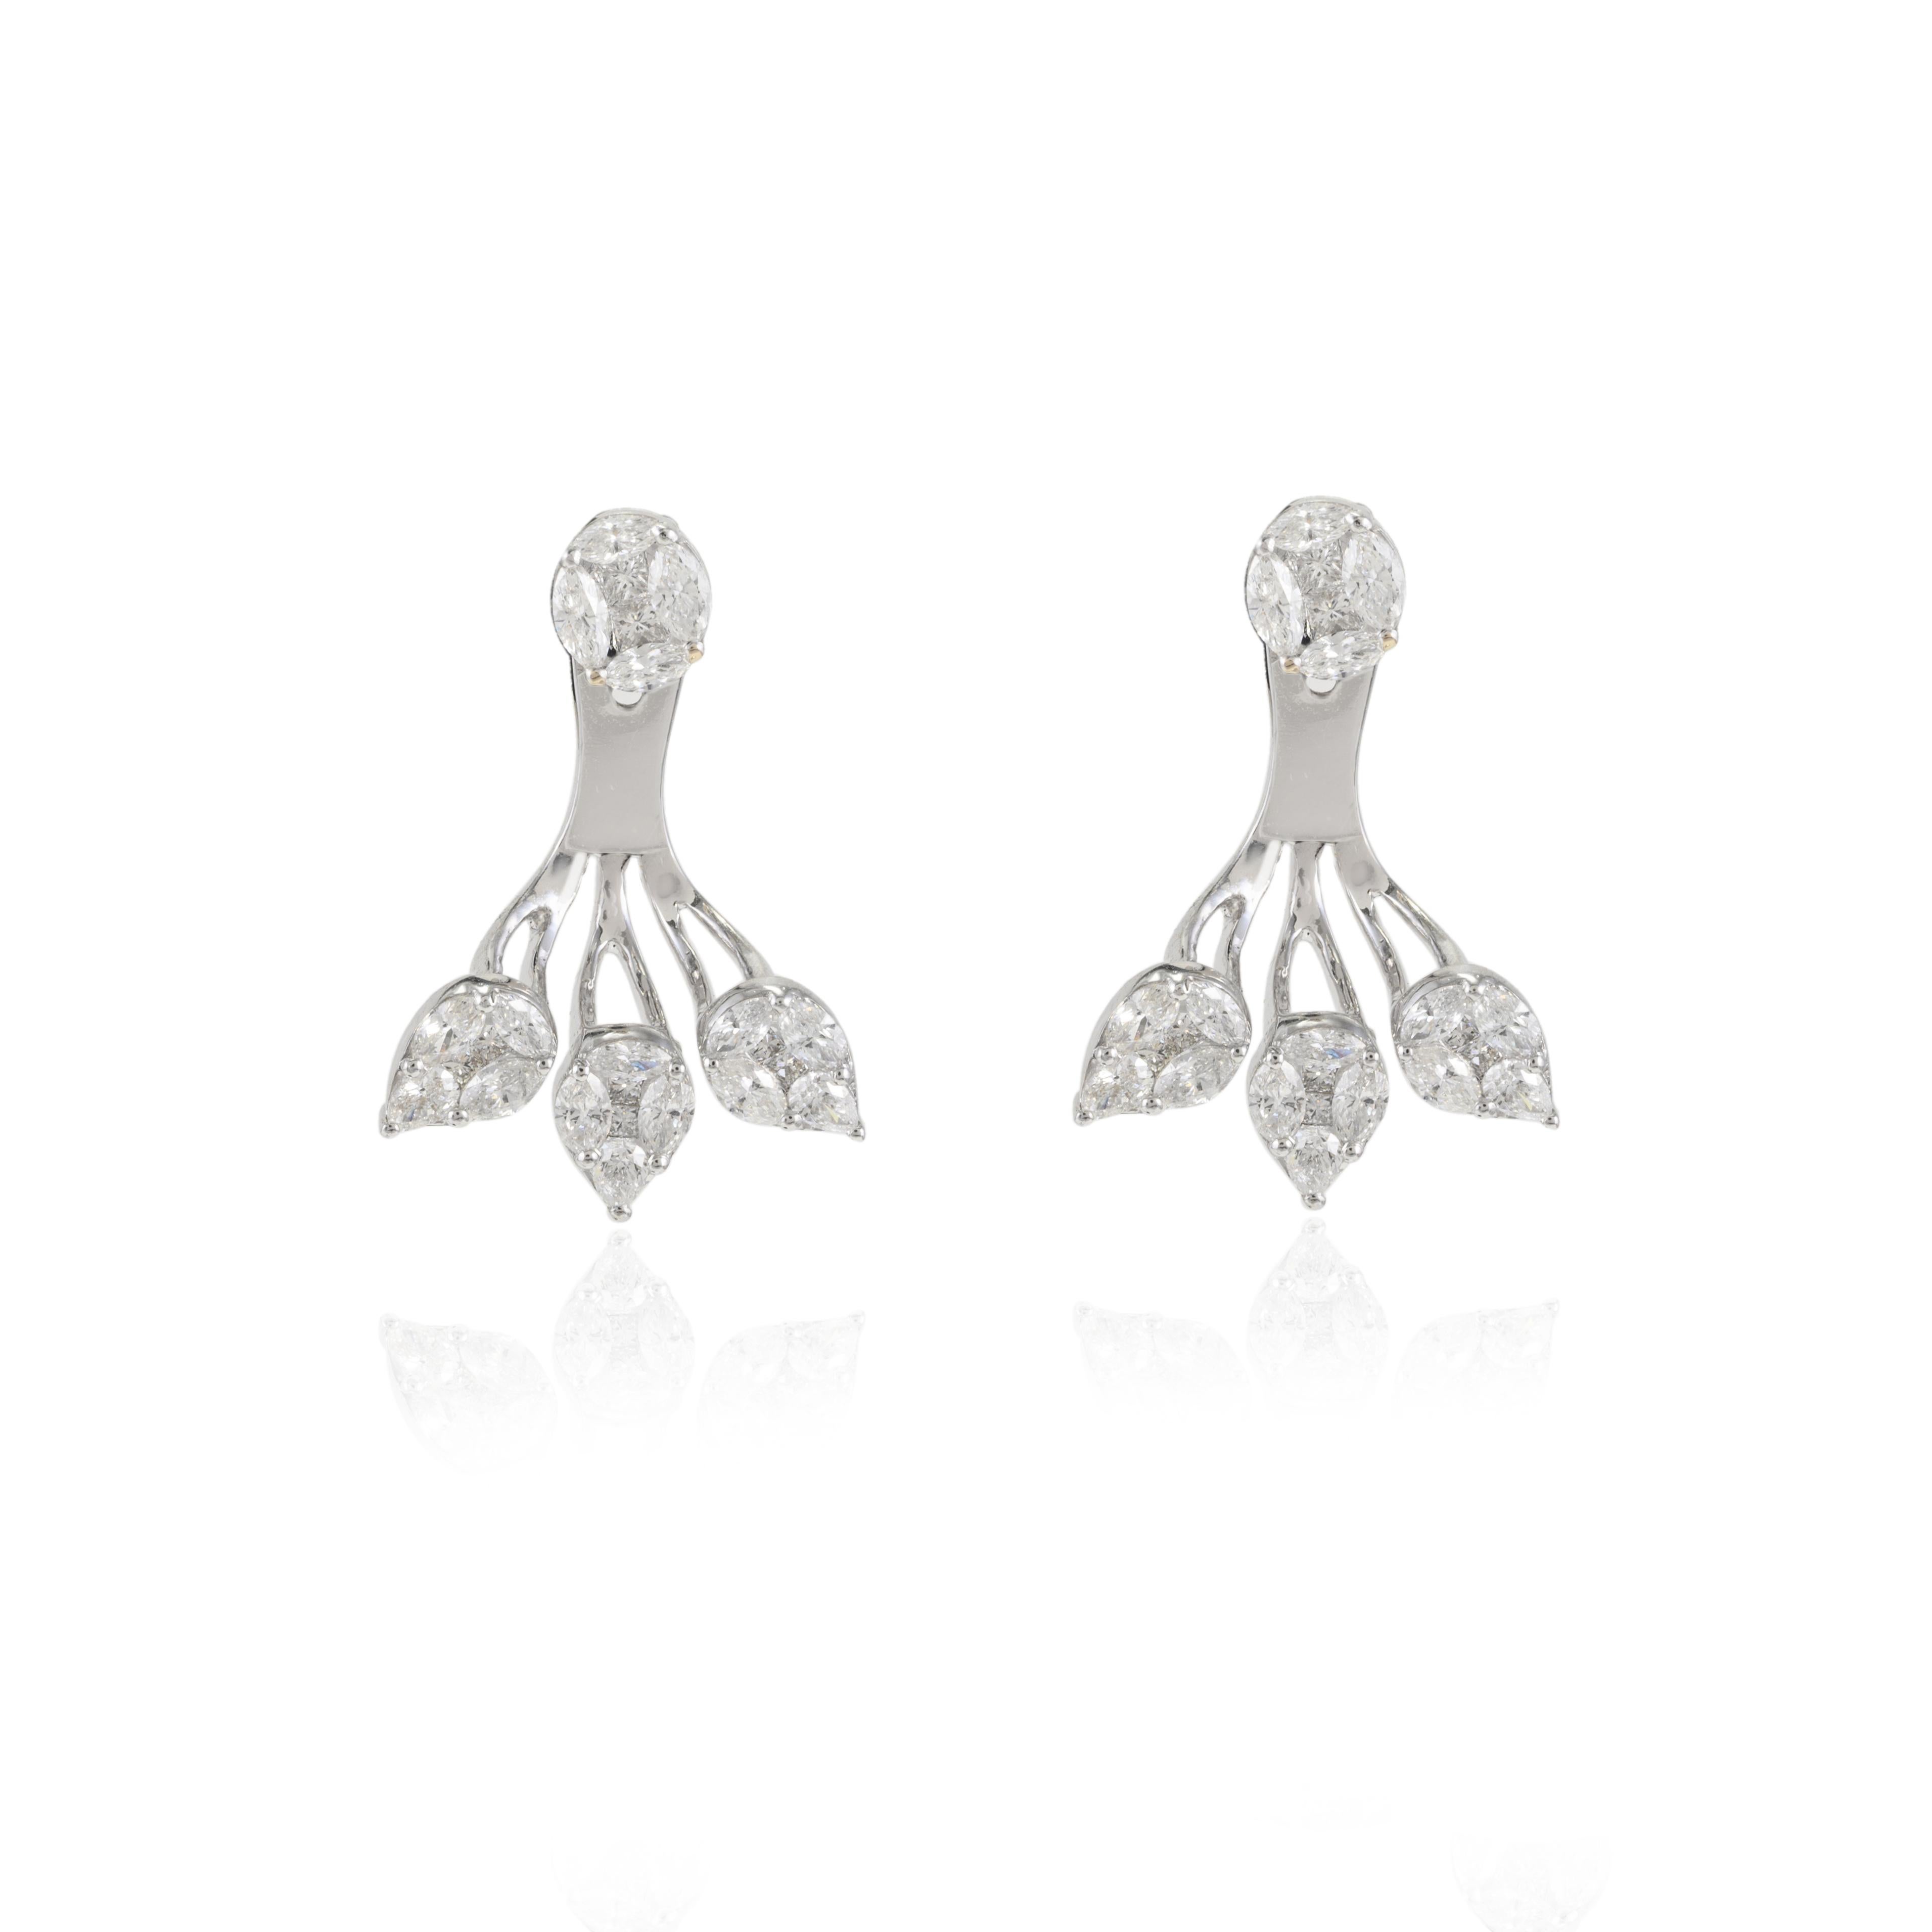 Unique 1.34 Carat Natural Diamond Ear Jacket Earrings in 18K Solid White Gold In New Condition For Sale In Houston, TX